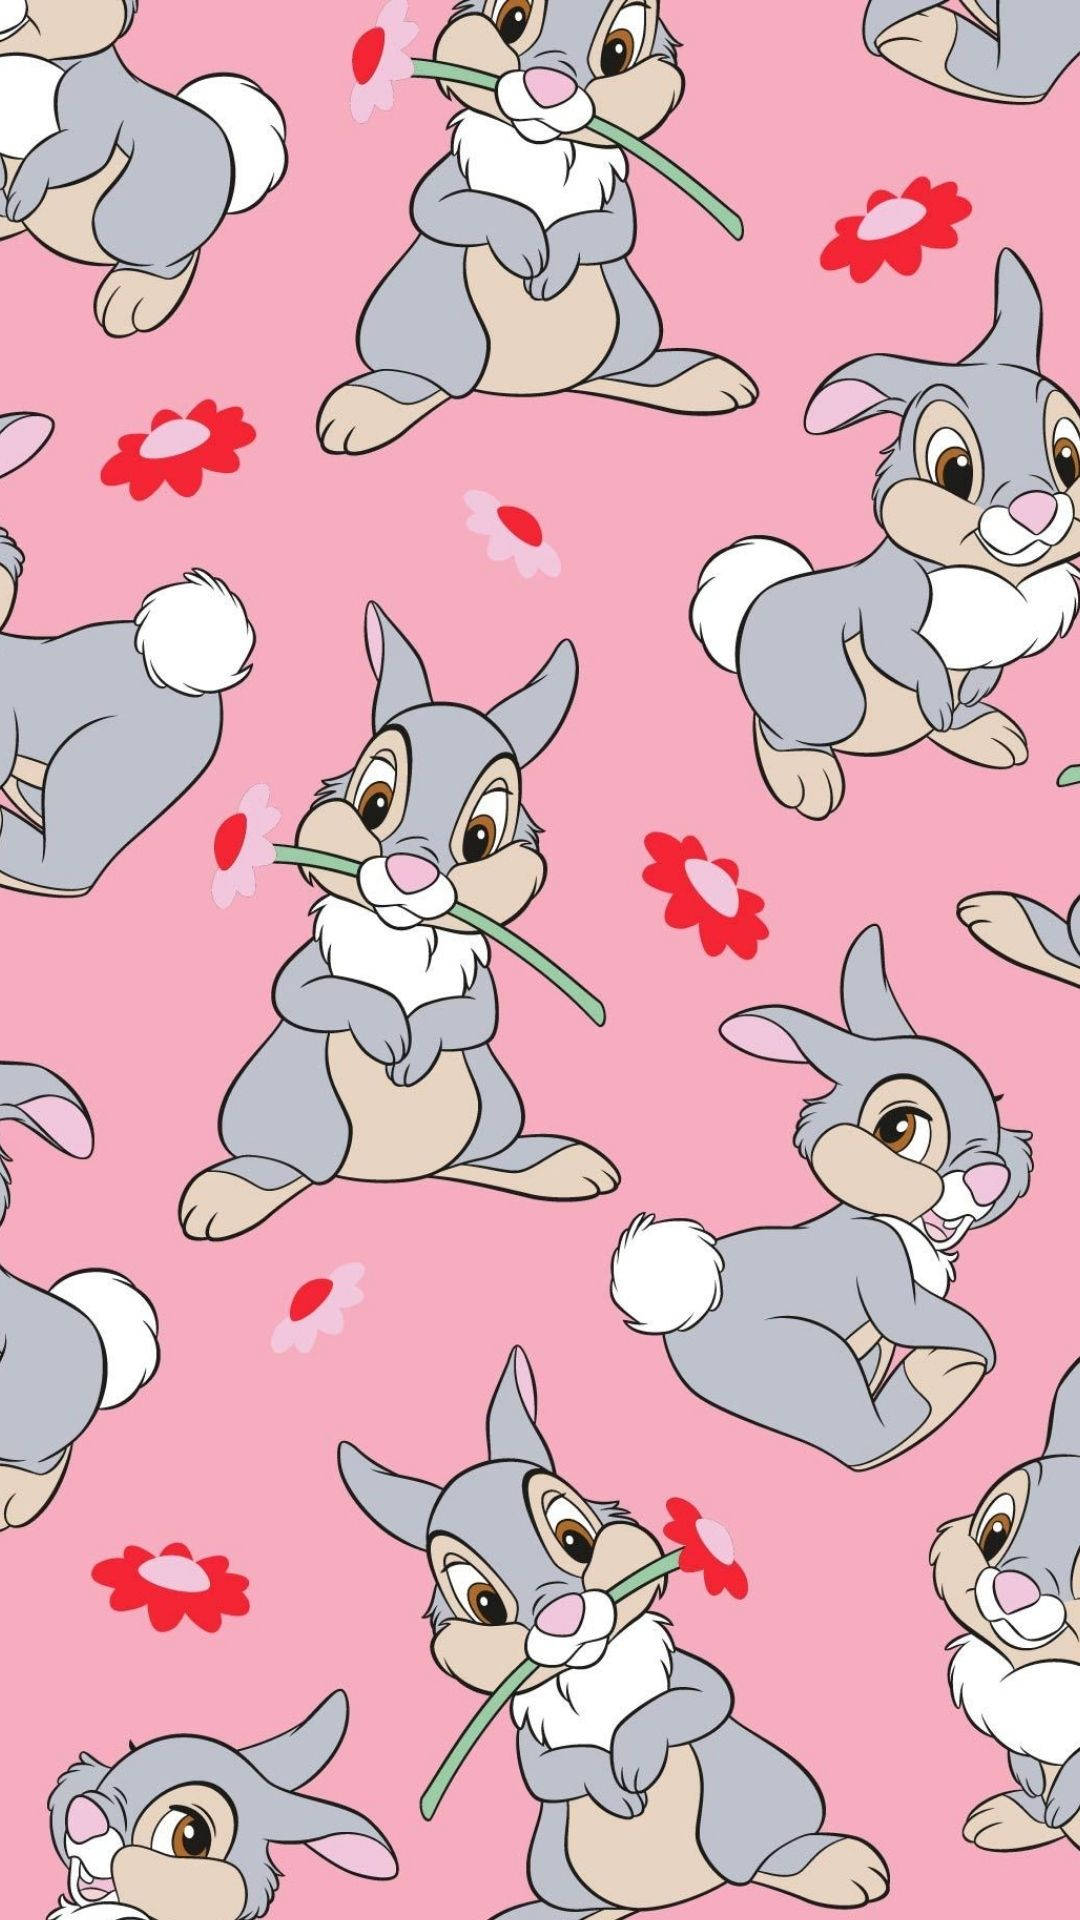 Thumper And Flowers Pattern